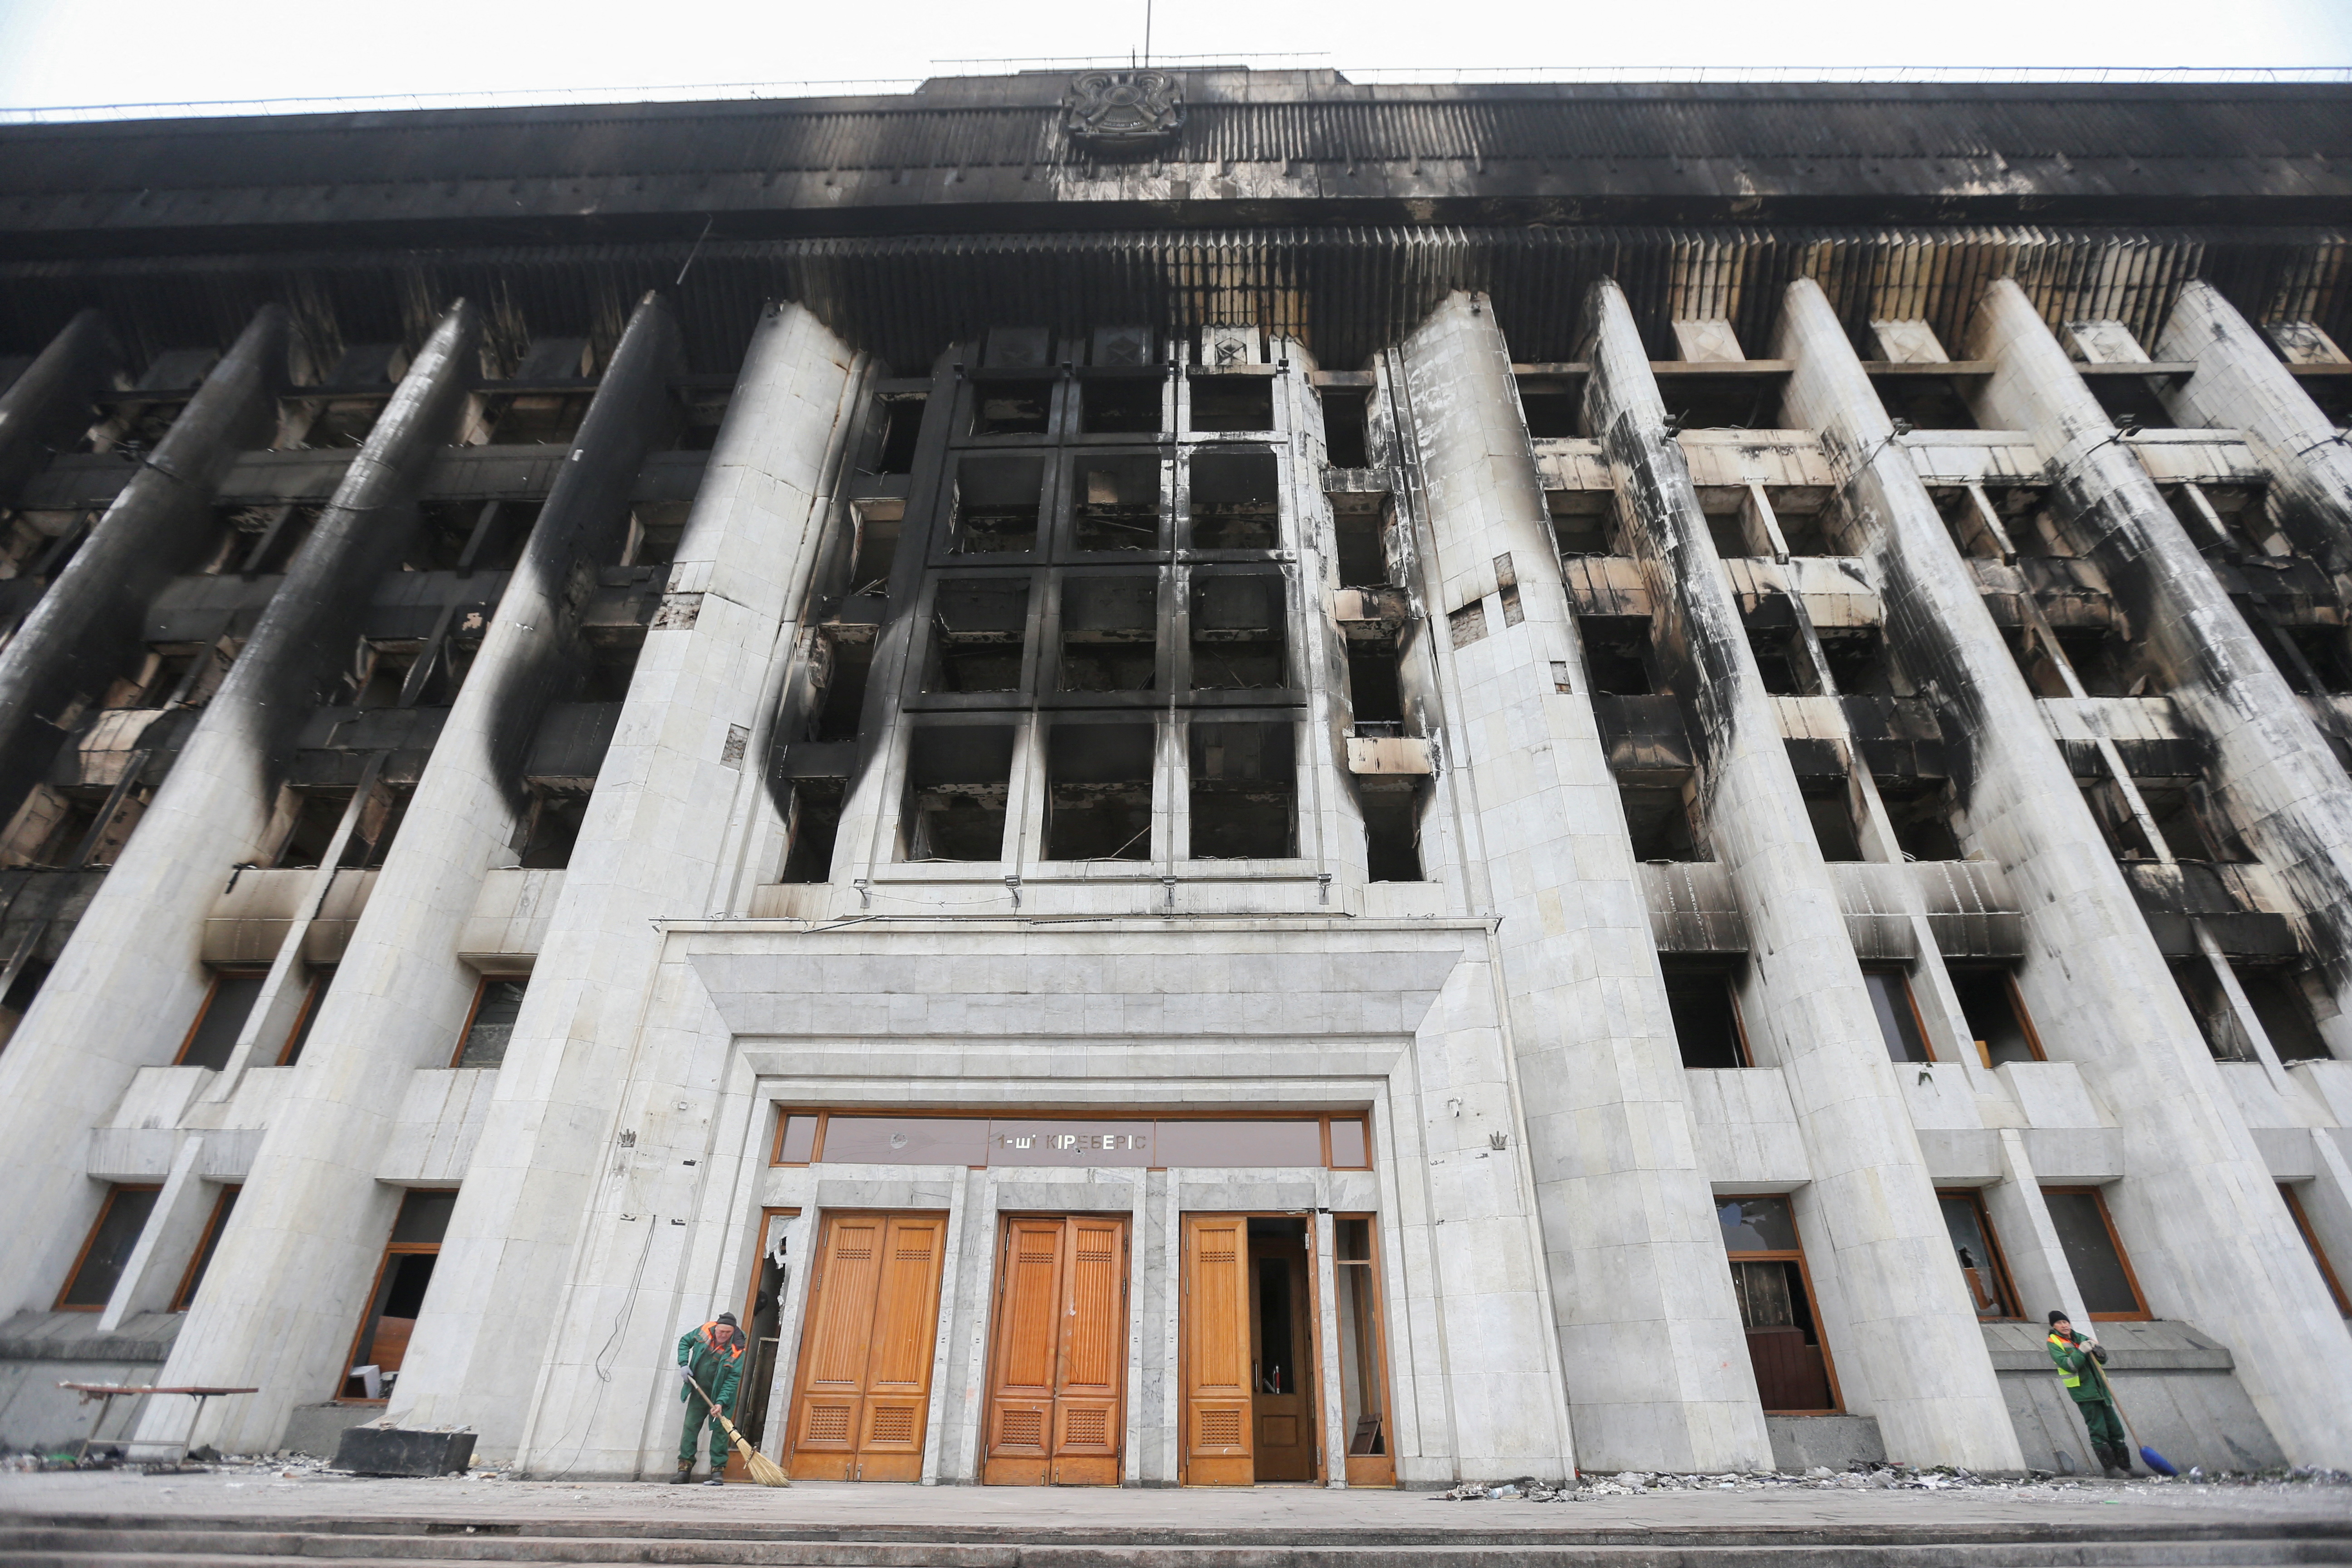 A view shows the burnt city administration headquarters in Almaty